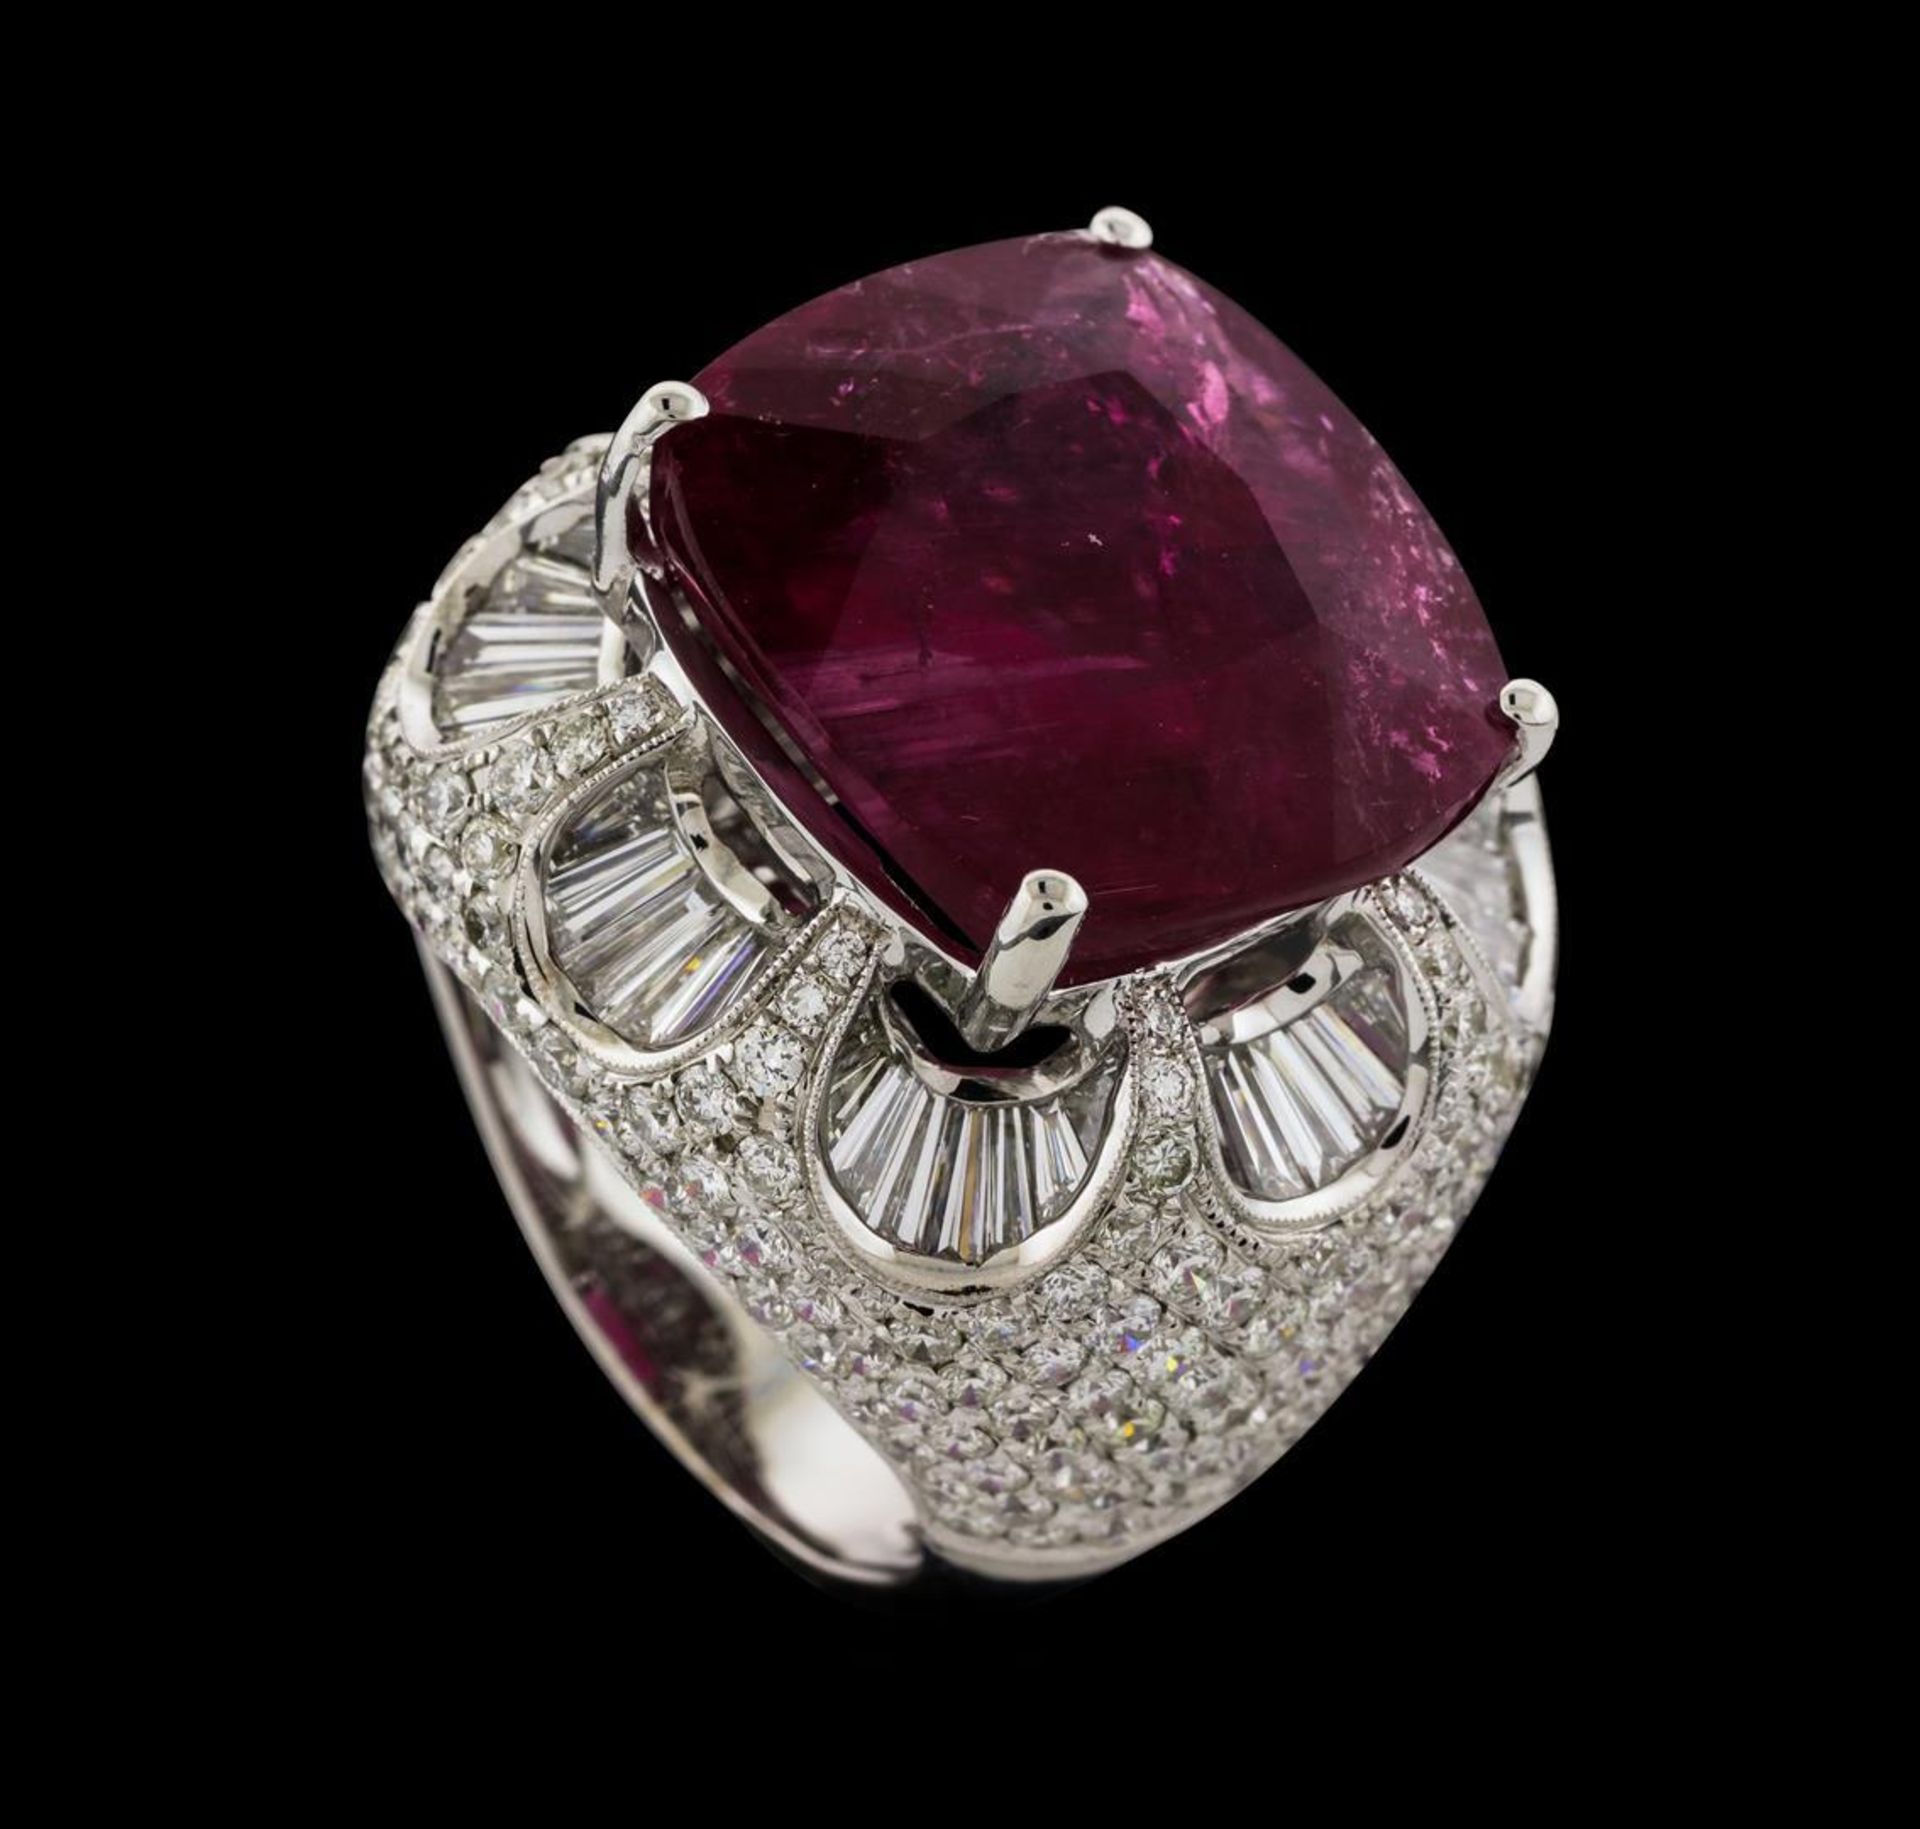 17.68 ctw Pink Tourmaline and Diamond Ring - 18KT White Gold - Image 4 of 5